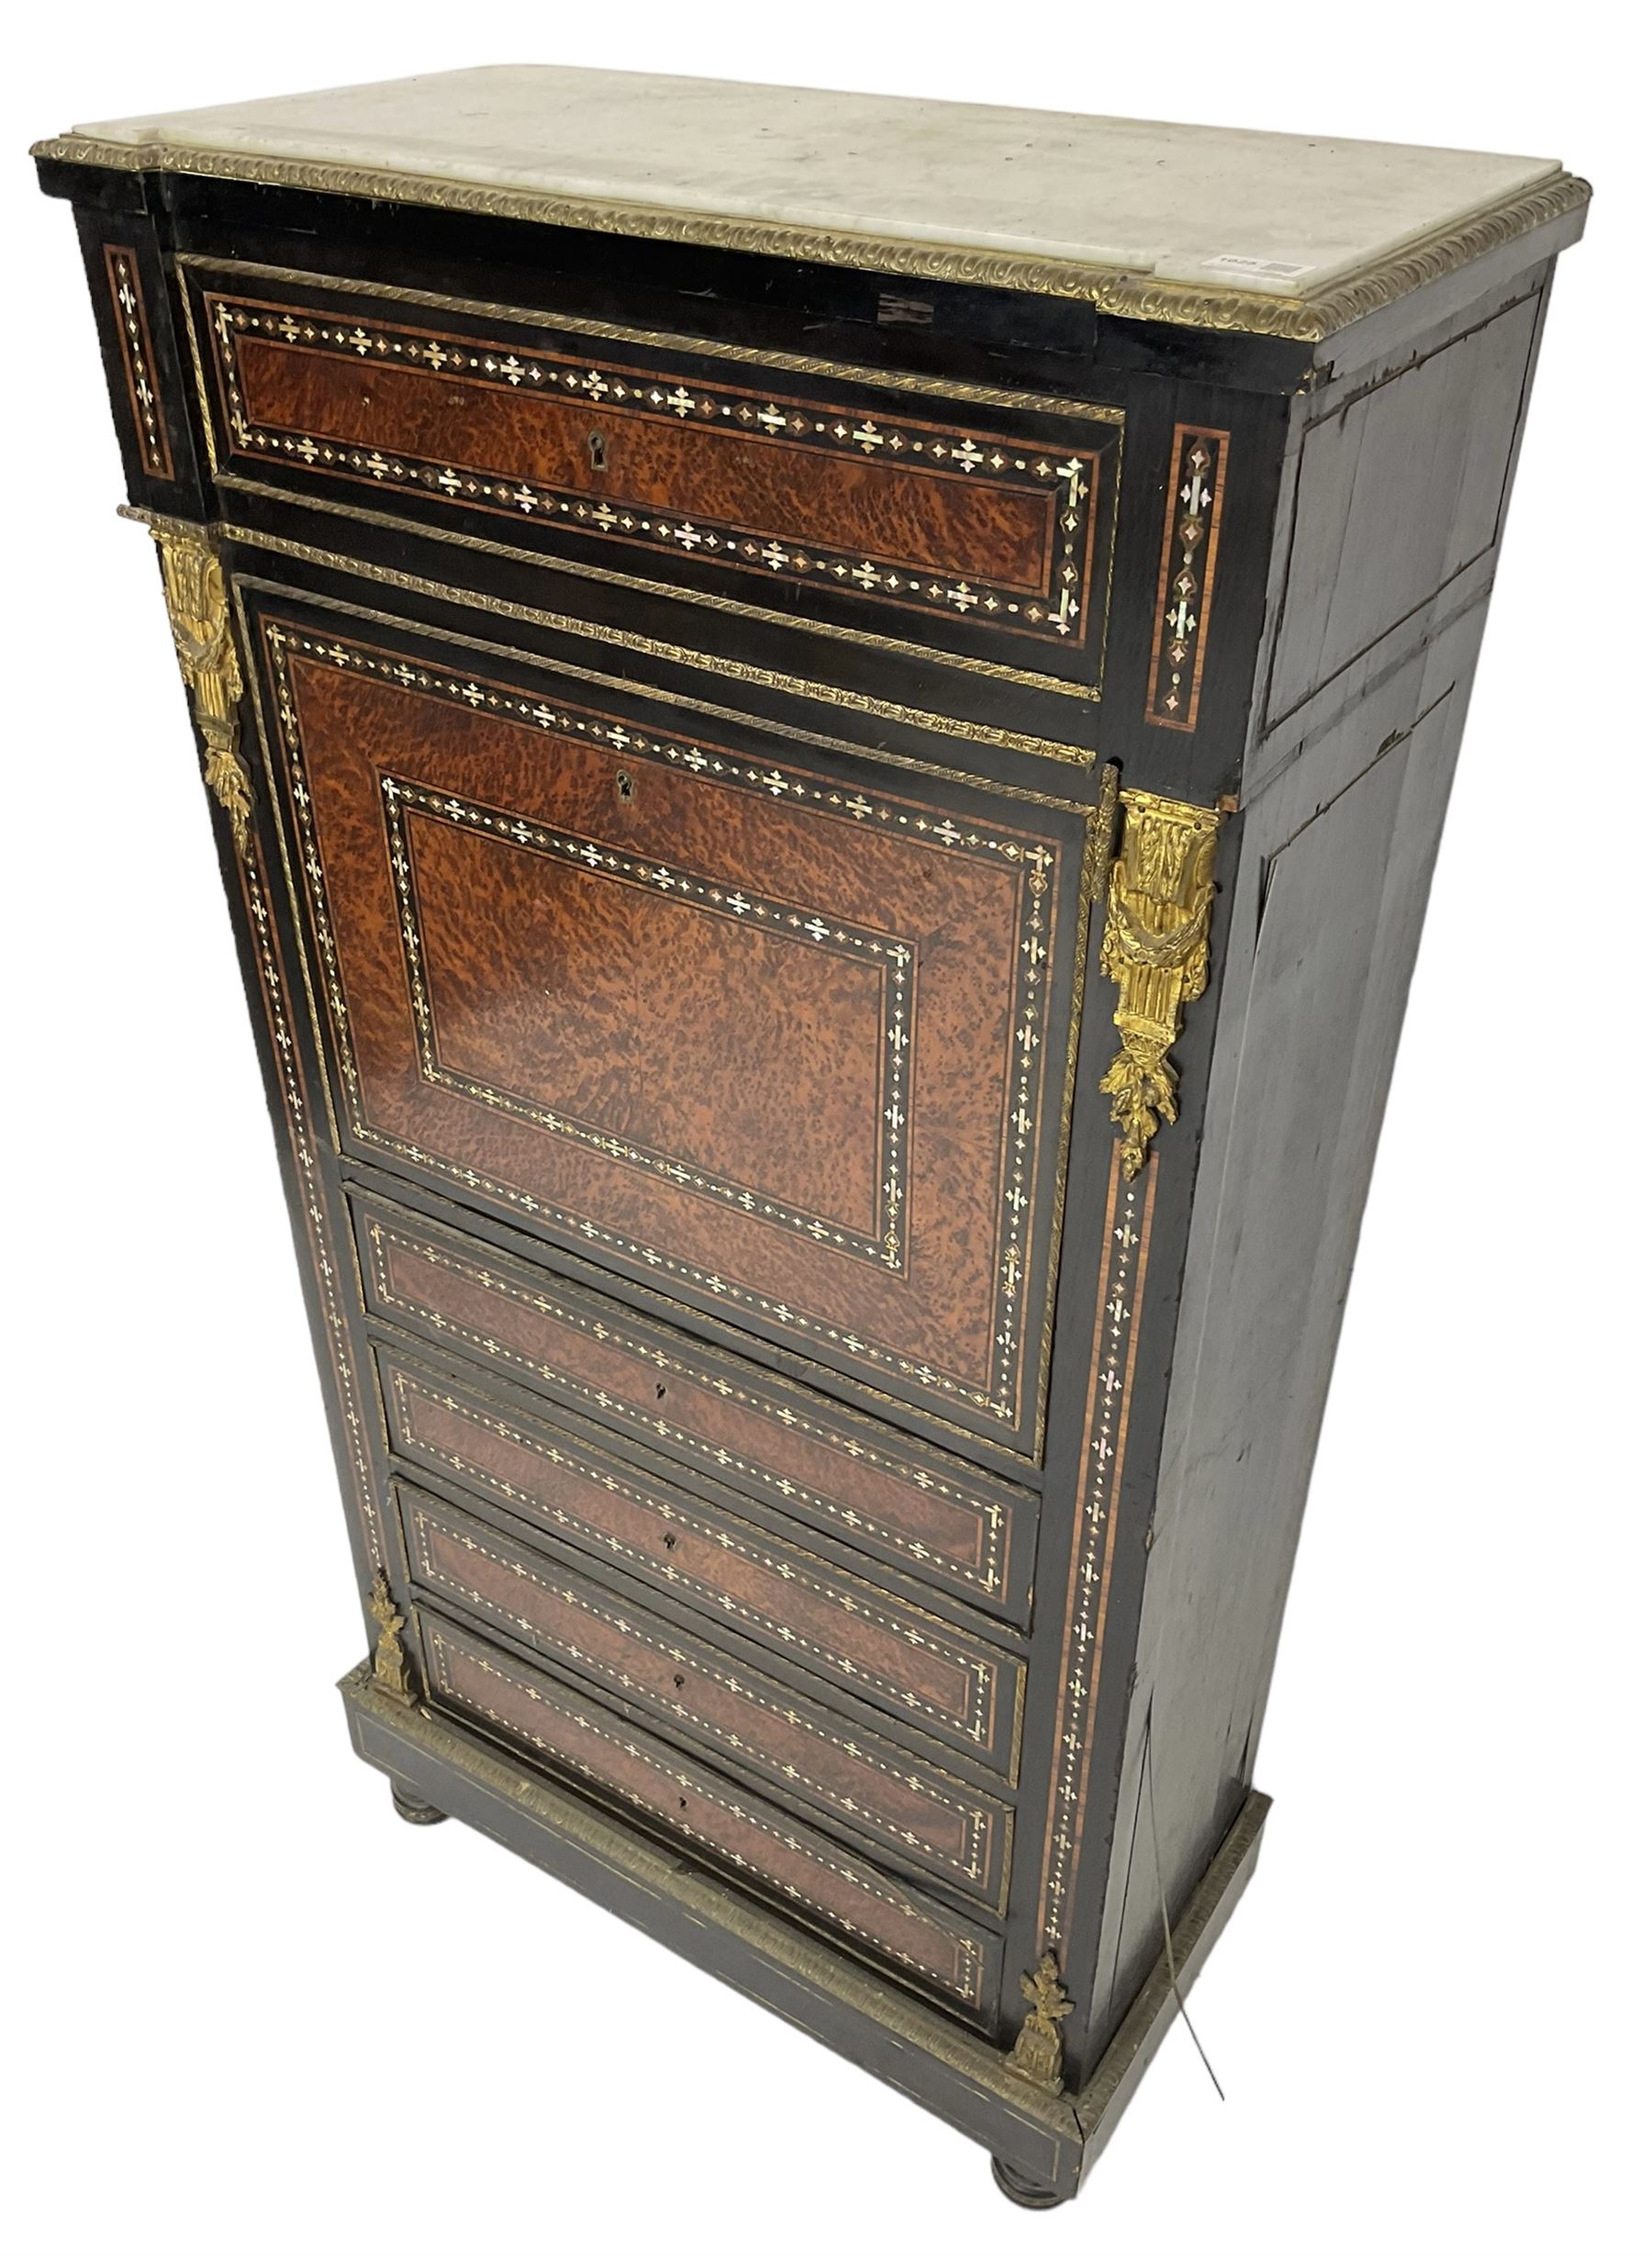 Late 19th century French ebonised and amboyna secrétaire à abattant - Image 4 of 8